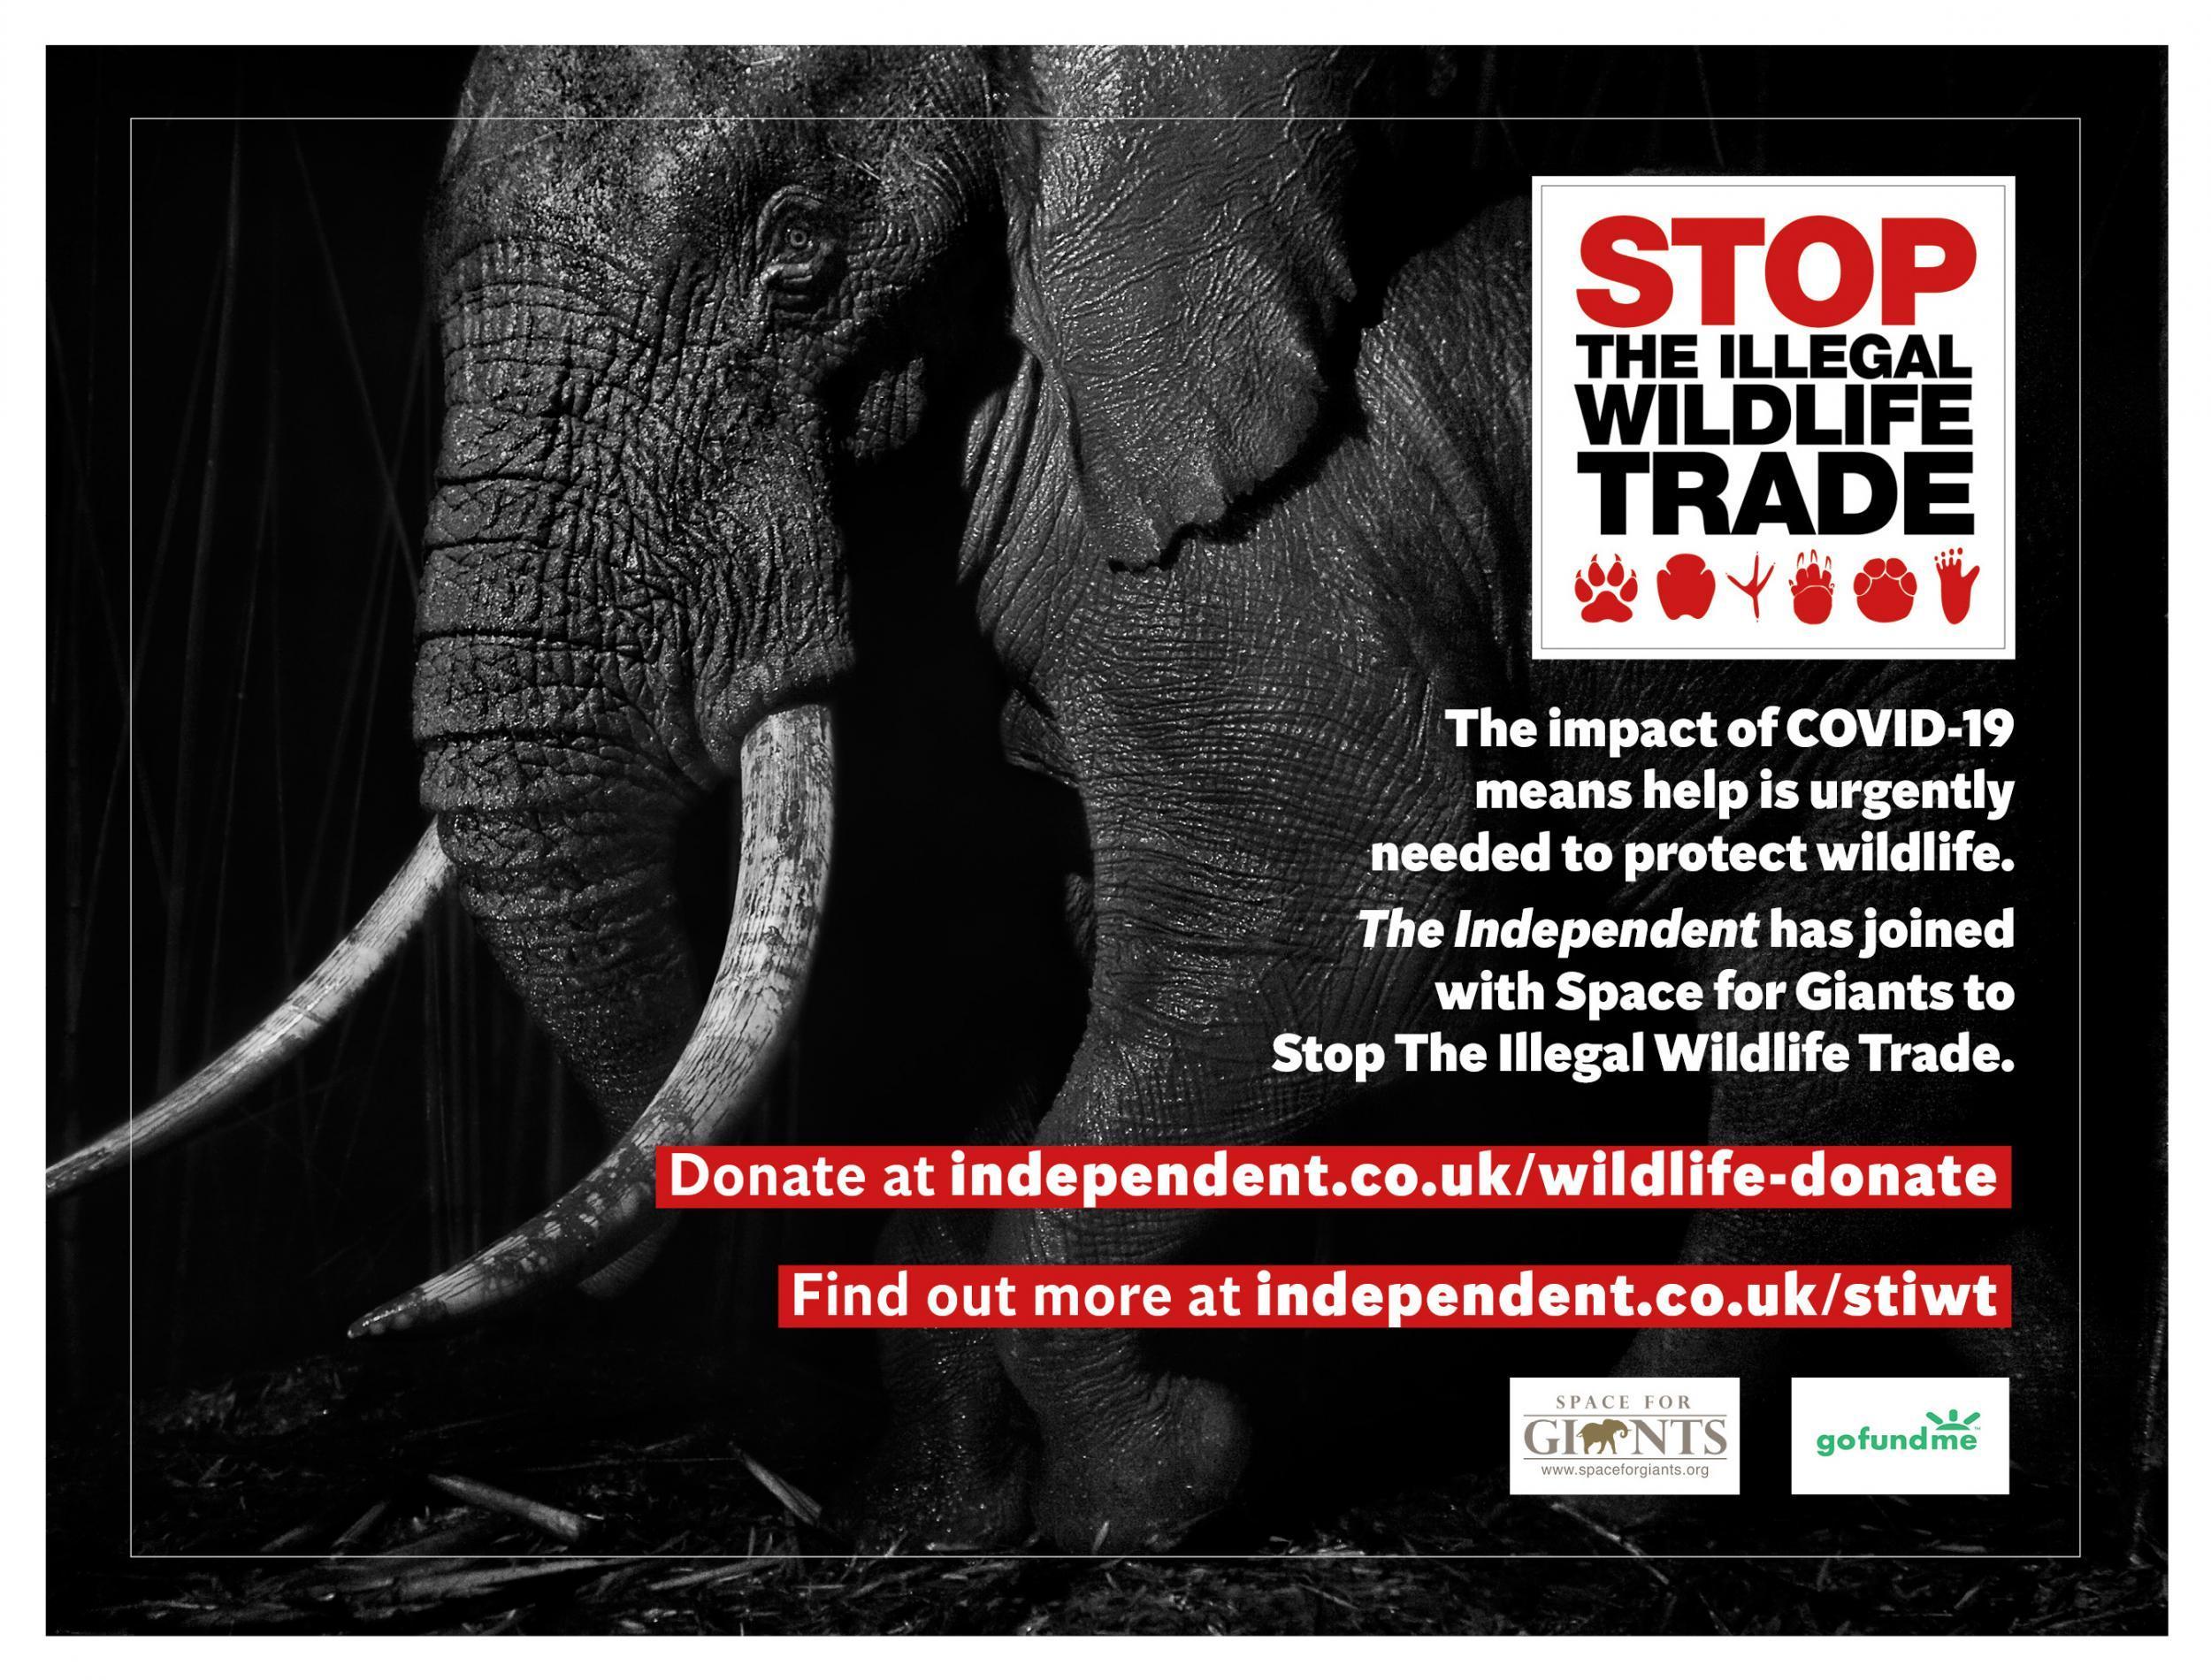 &#13;
The Covid-19 conservation crisis has shown the urgency of The Independent’s Stop the Illegal Wildlife Trade campaign, which seeks an international effort to clamp down on illegal trade of wild animals&#13;